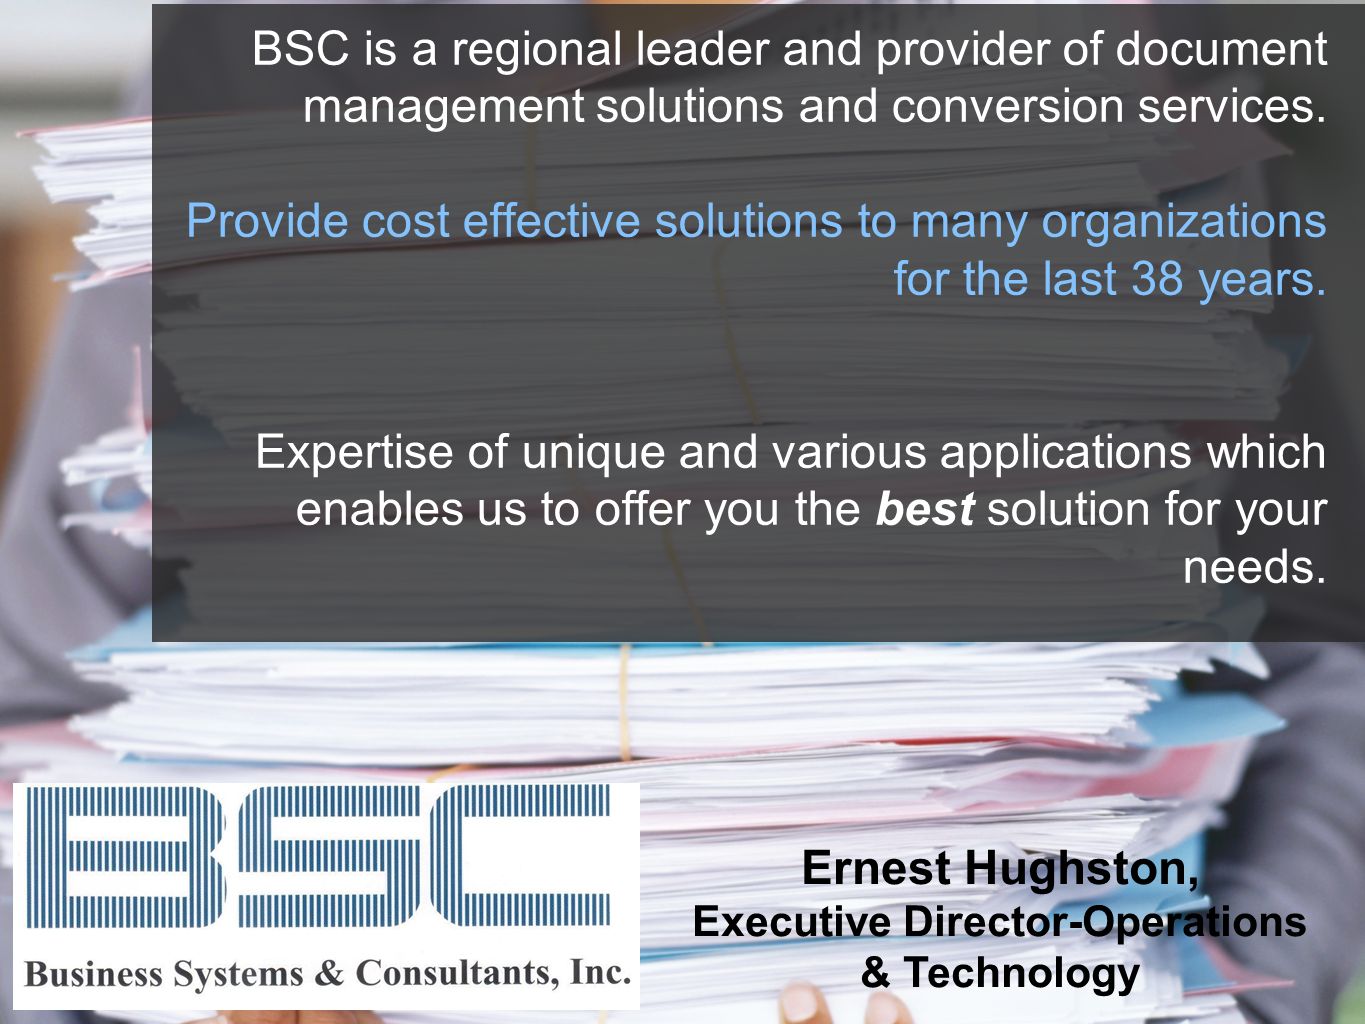 BSC is a regional leader and provider of document management solutions and conversion services.